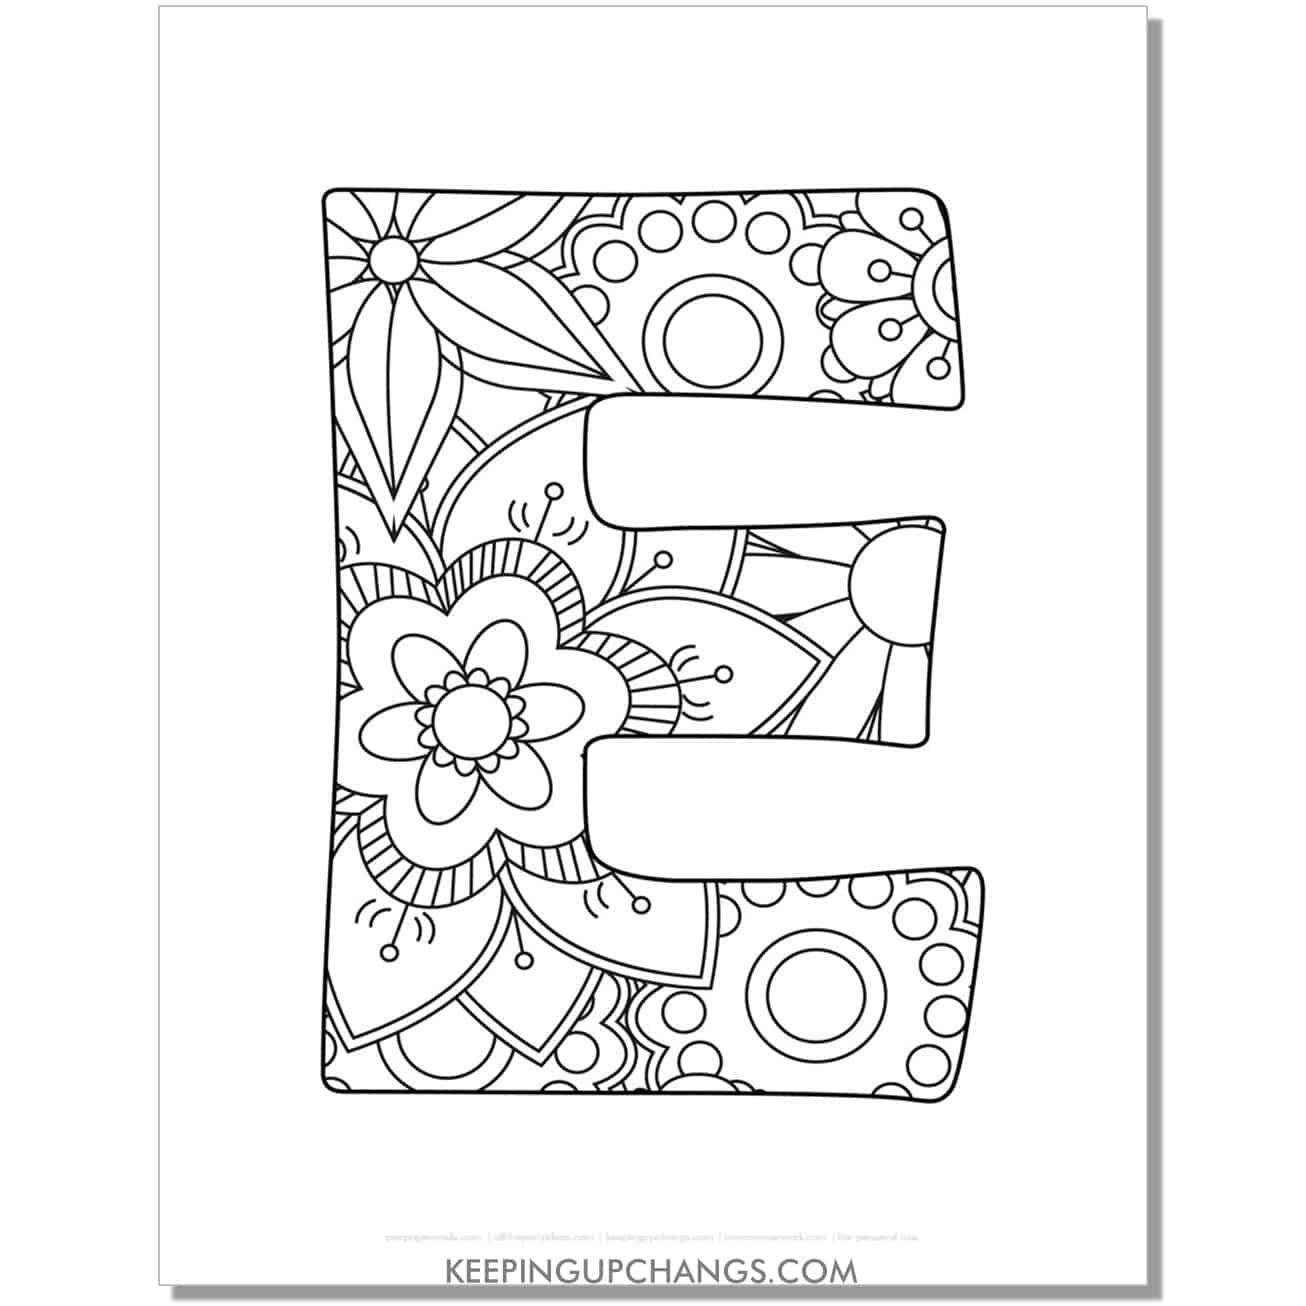 free letter e to color, complex mandala zentangle for adults.